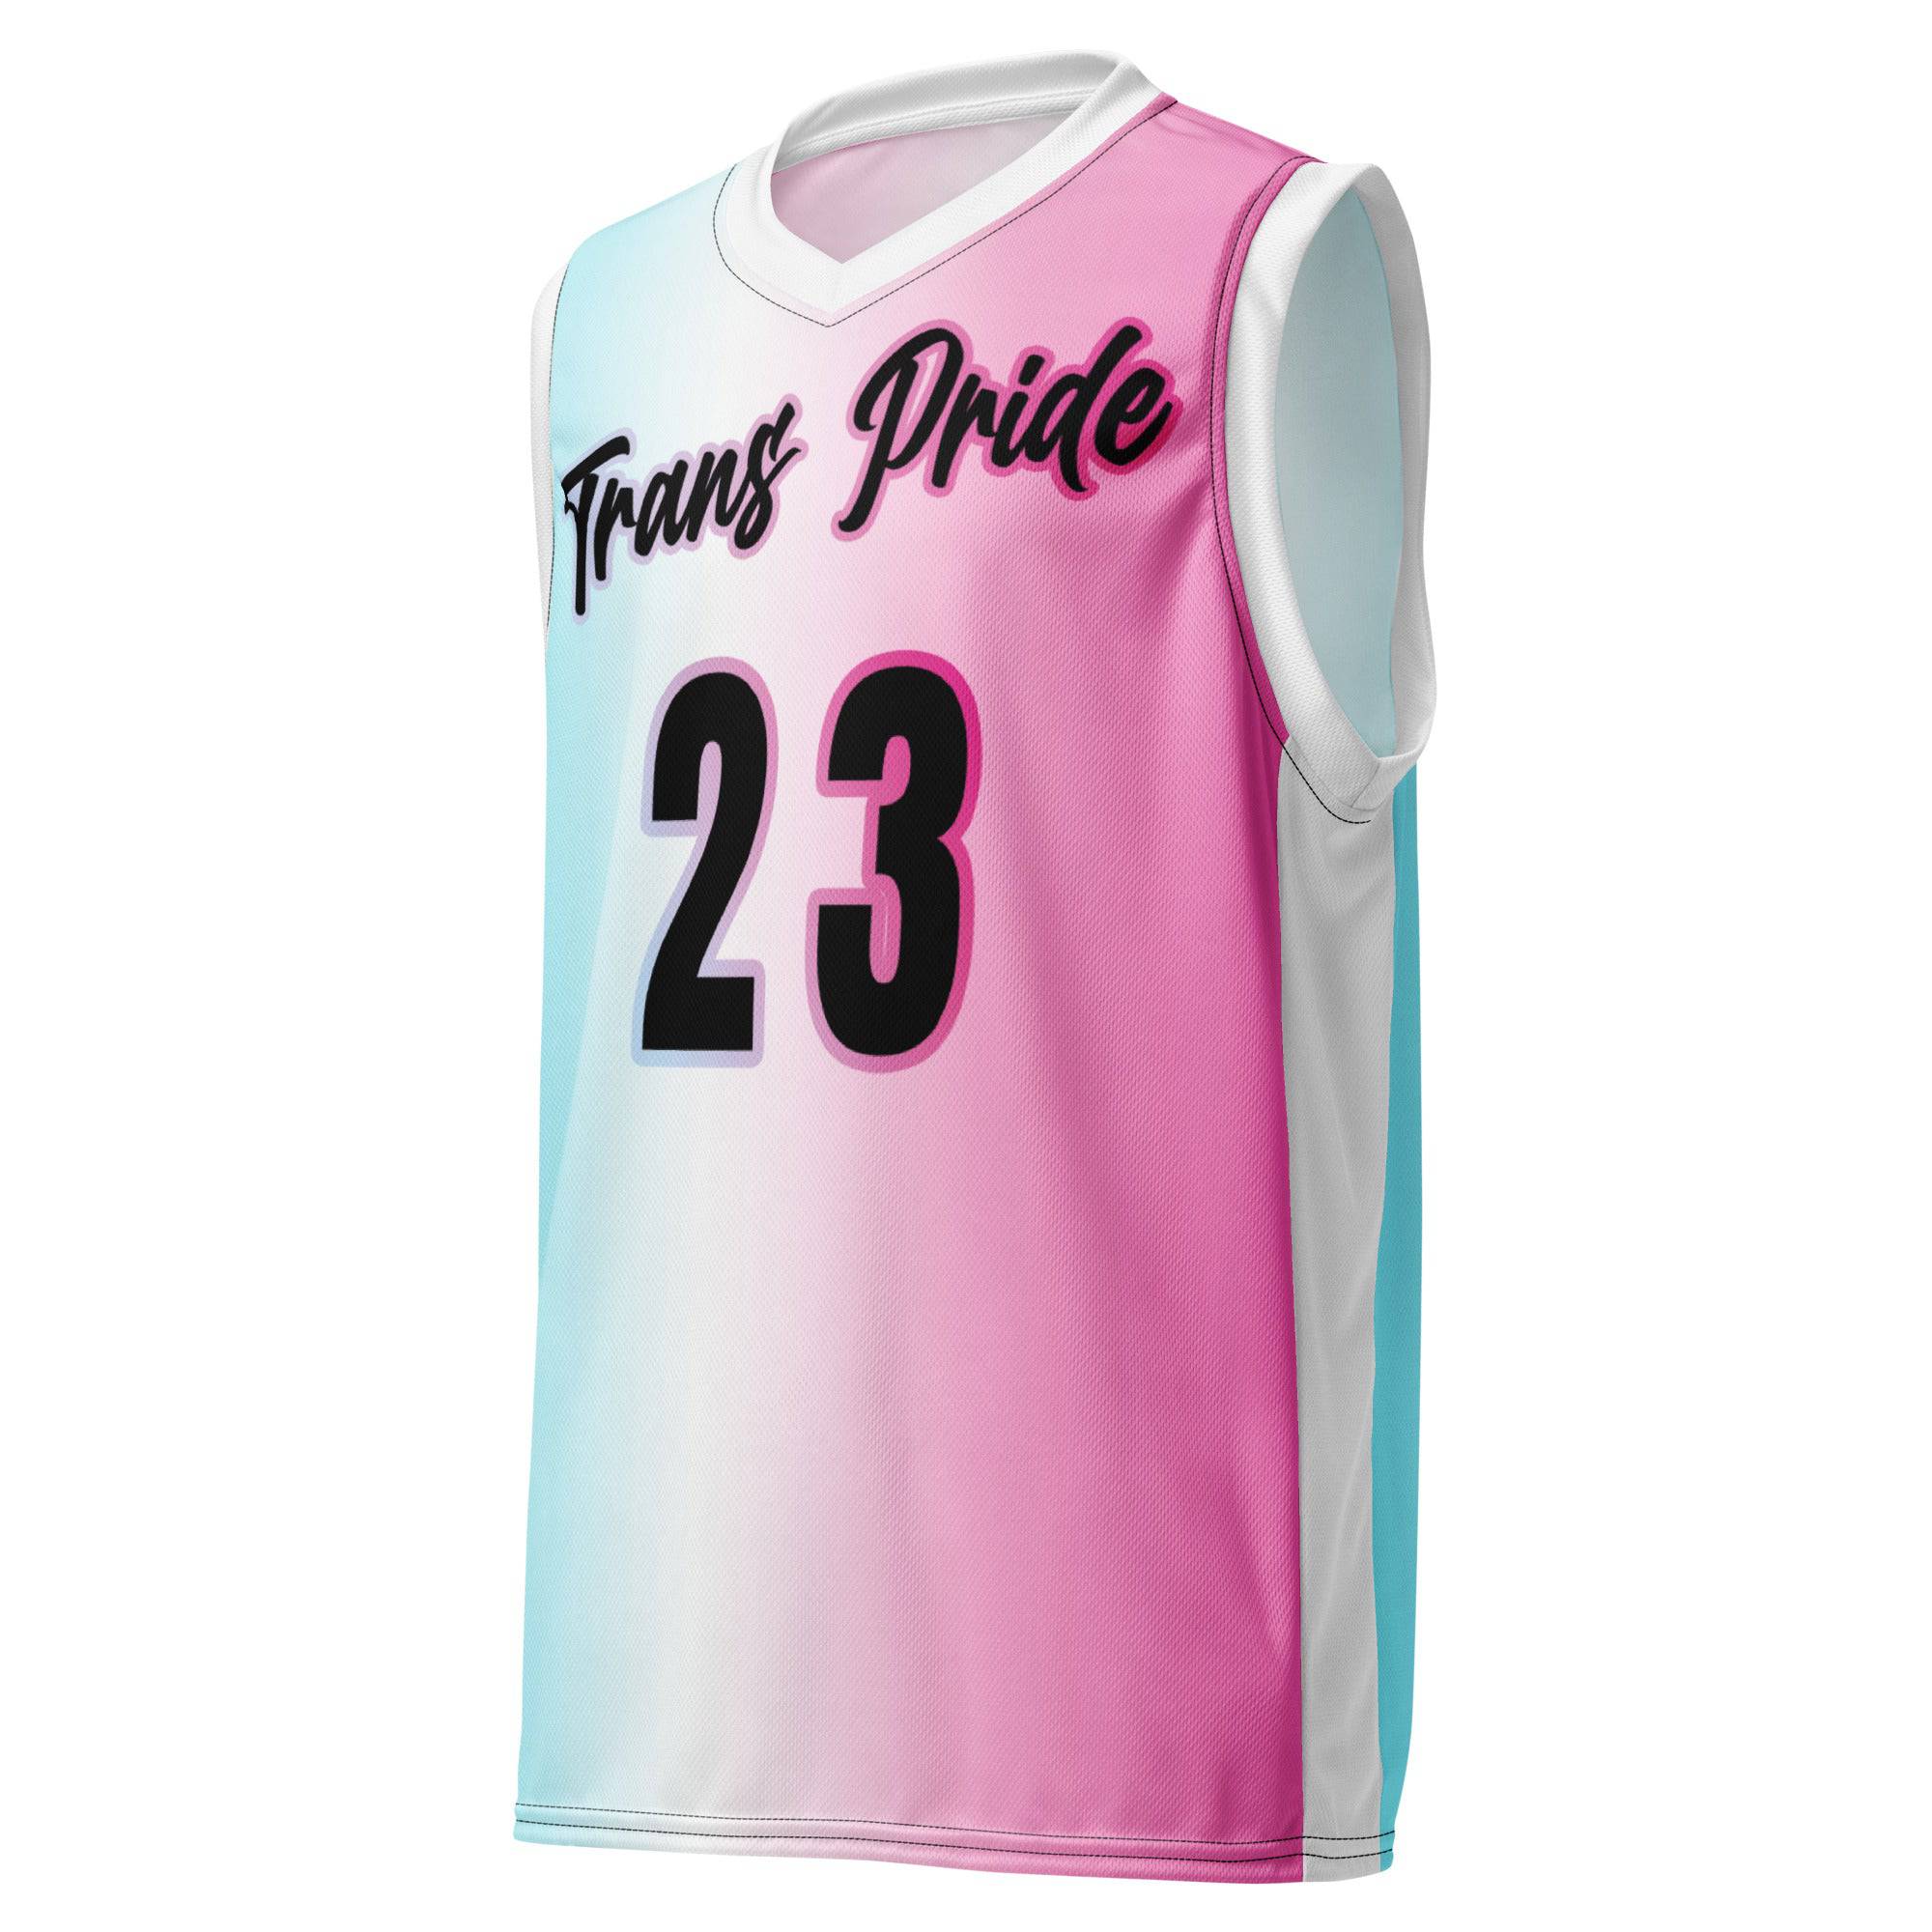 Trans Pride You Be Long Recycled Unisex Sports Jersey 2XS - 6XL 2XL